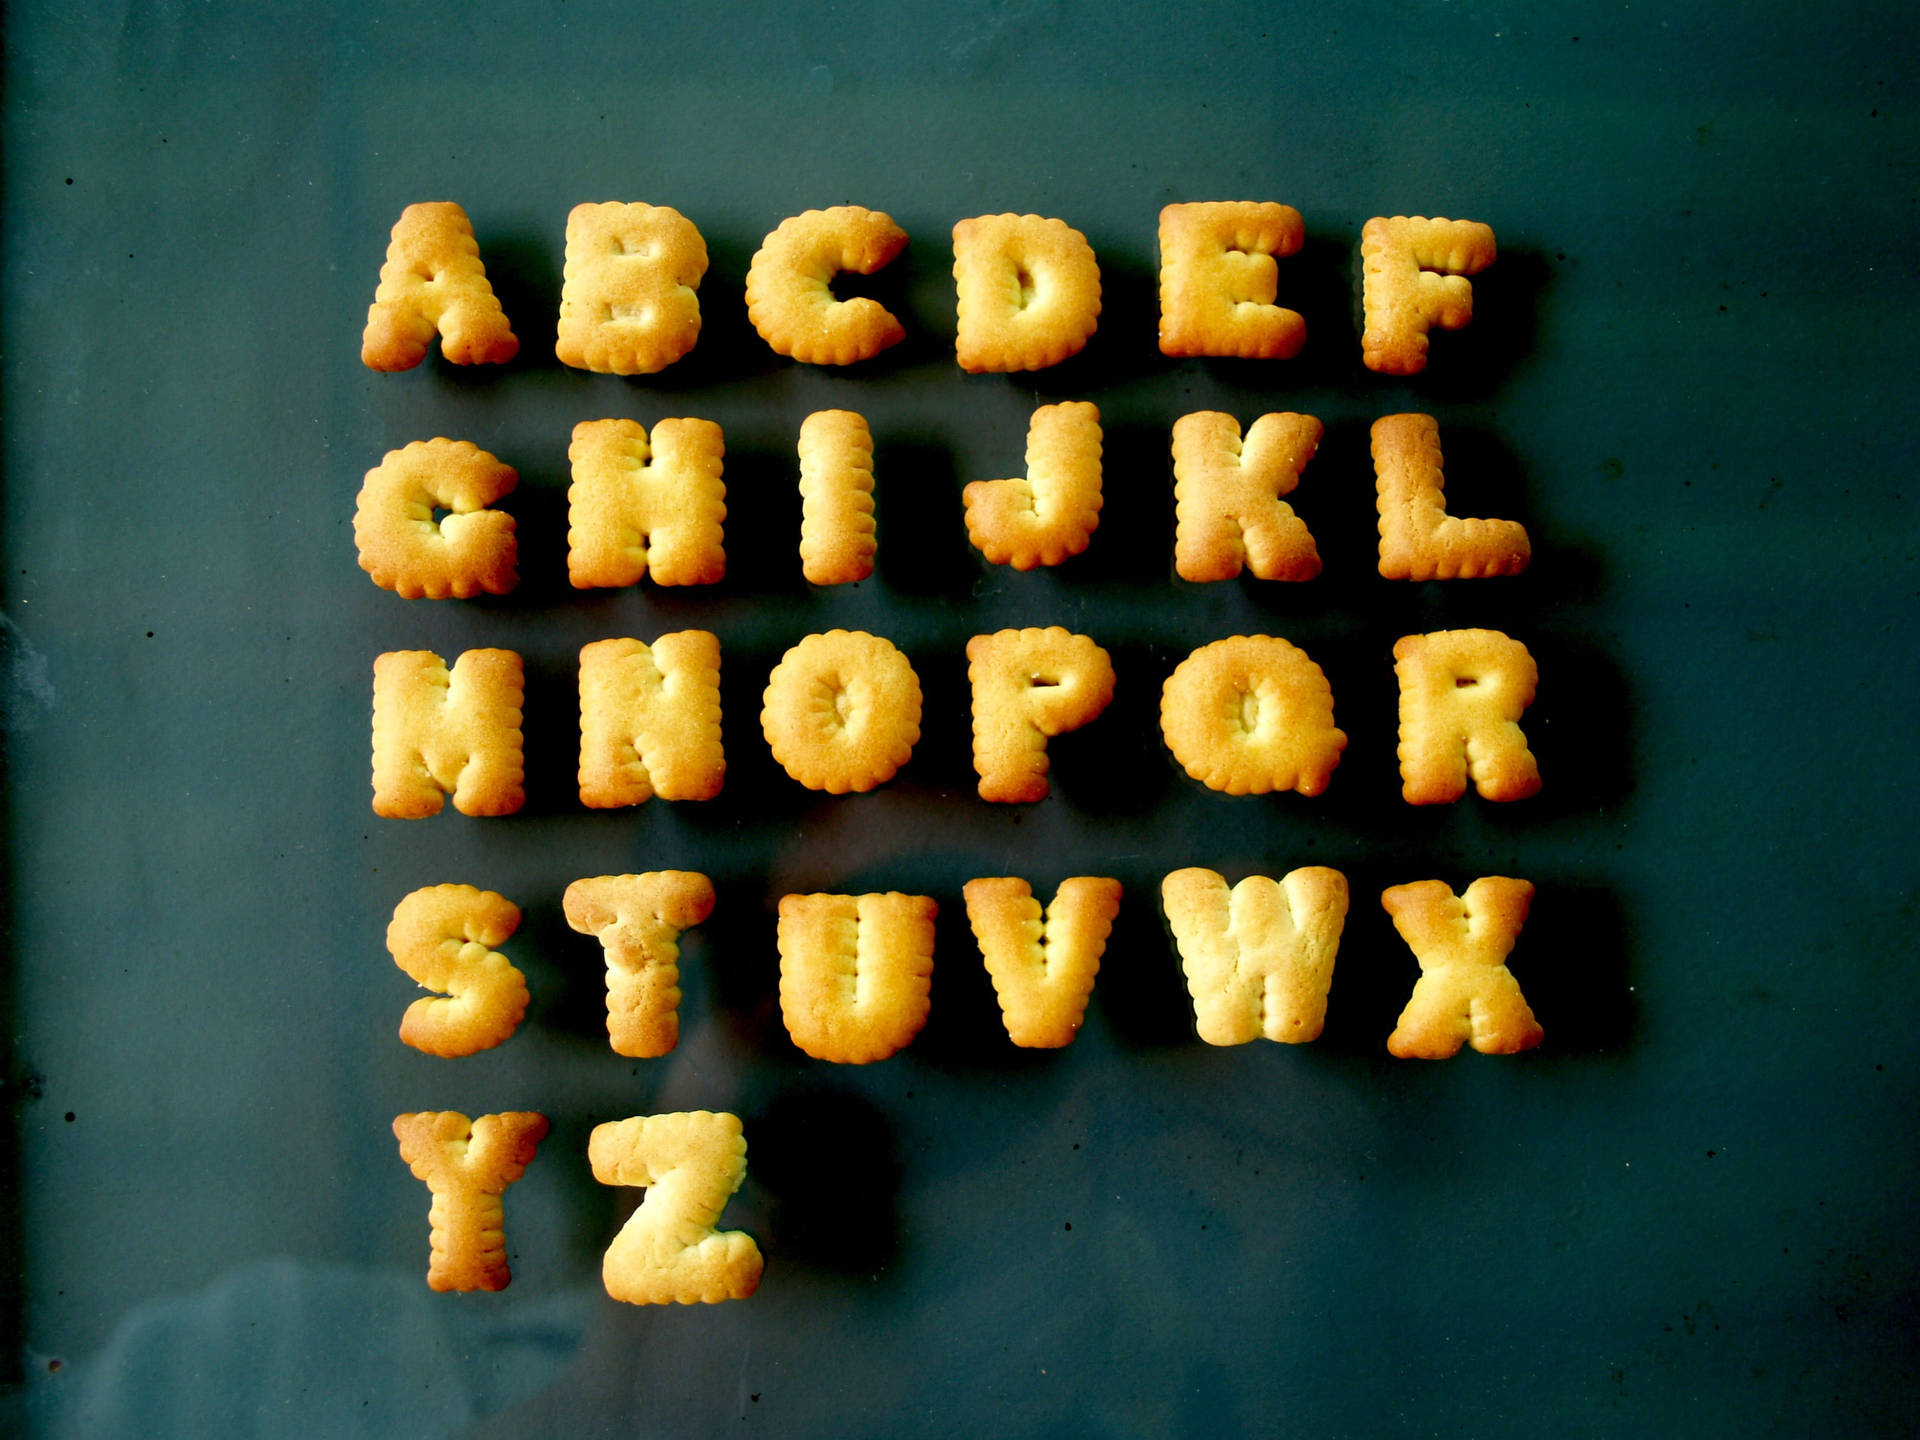 Educational Abc Alphabets Made From Crackers